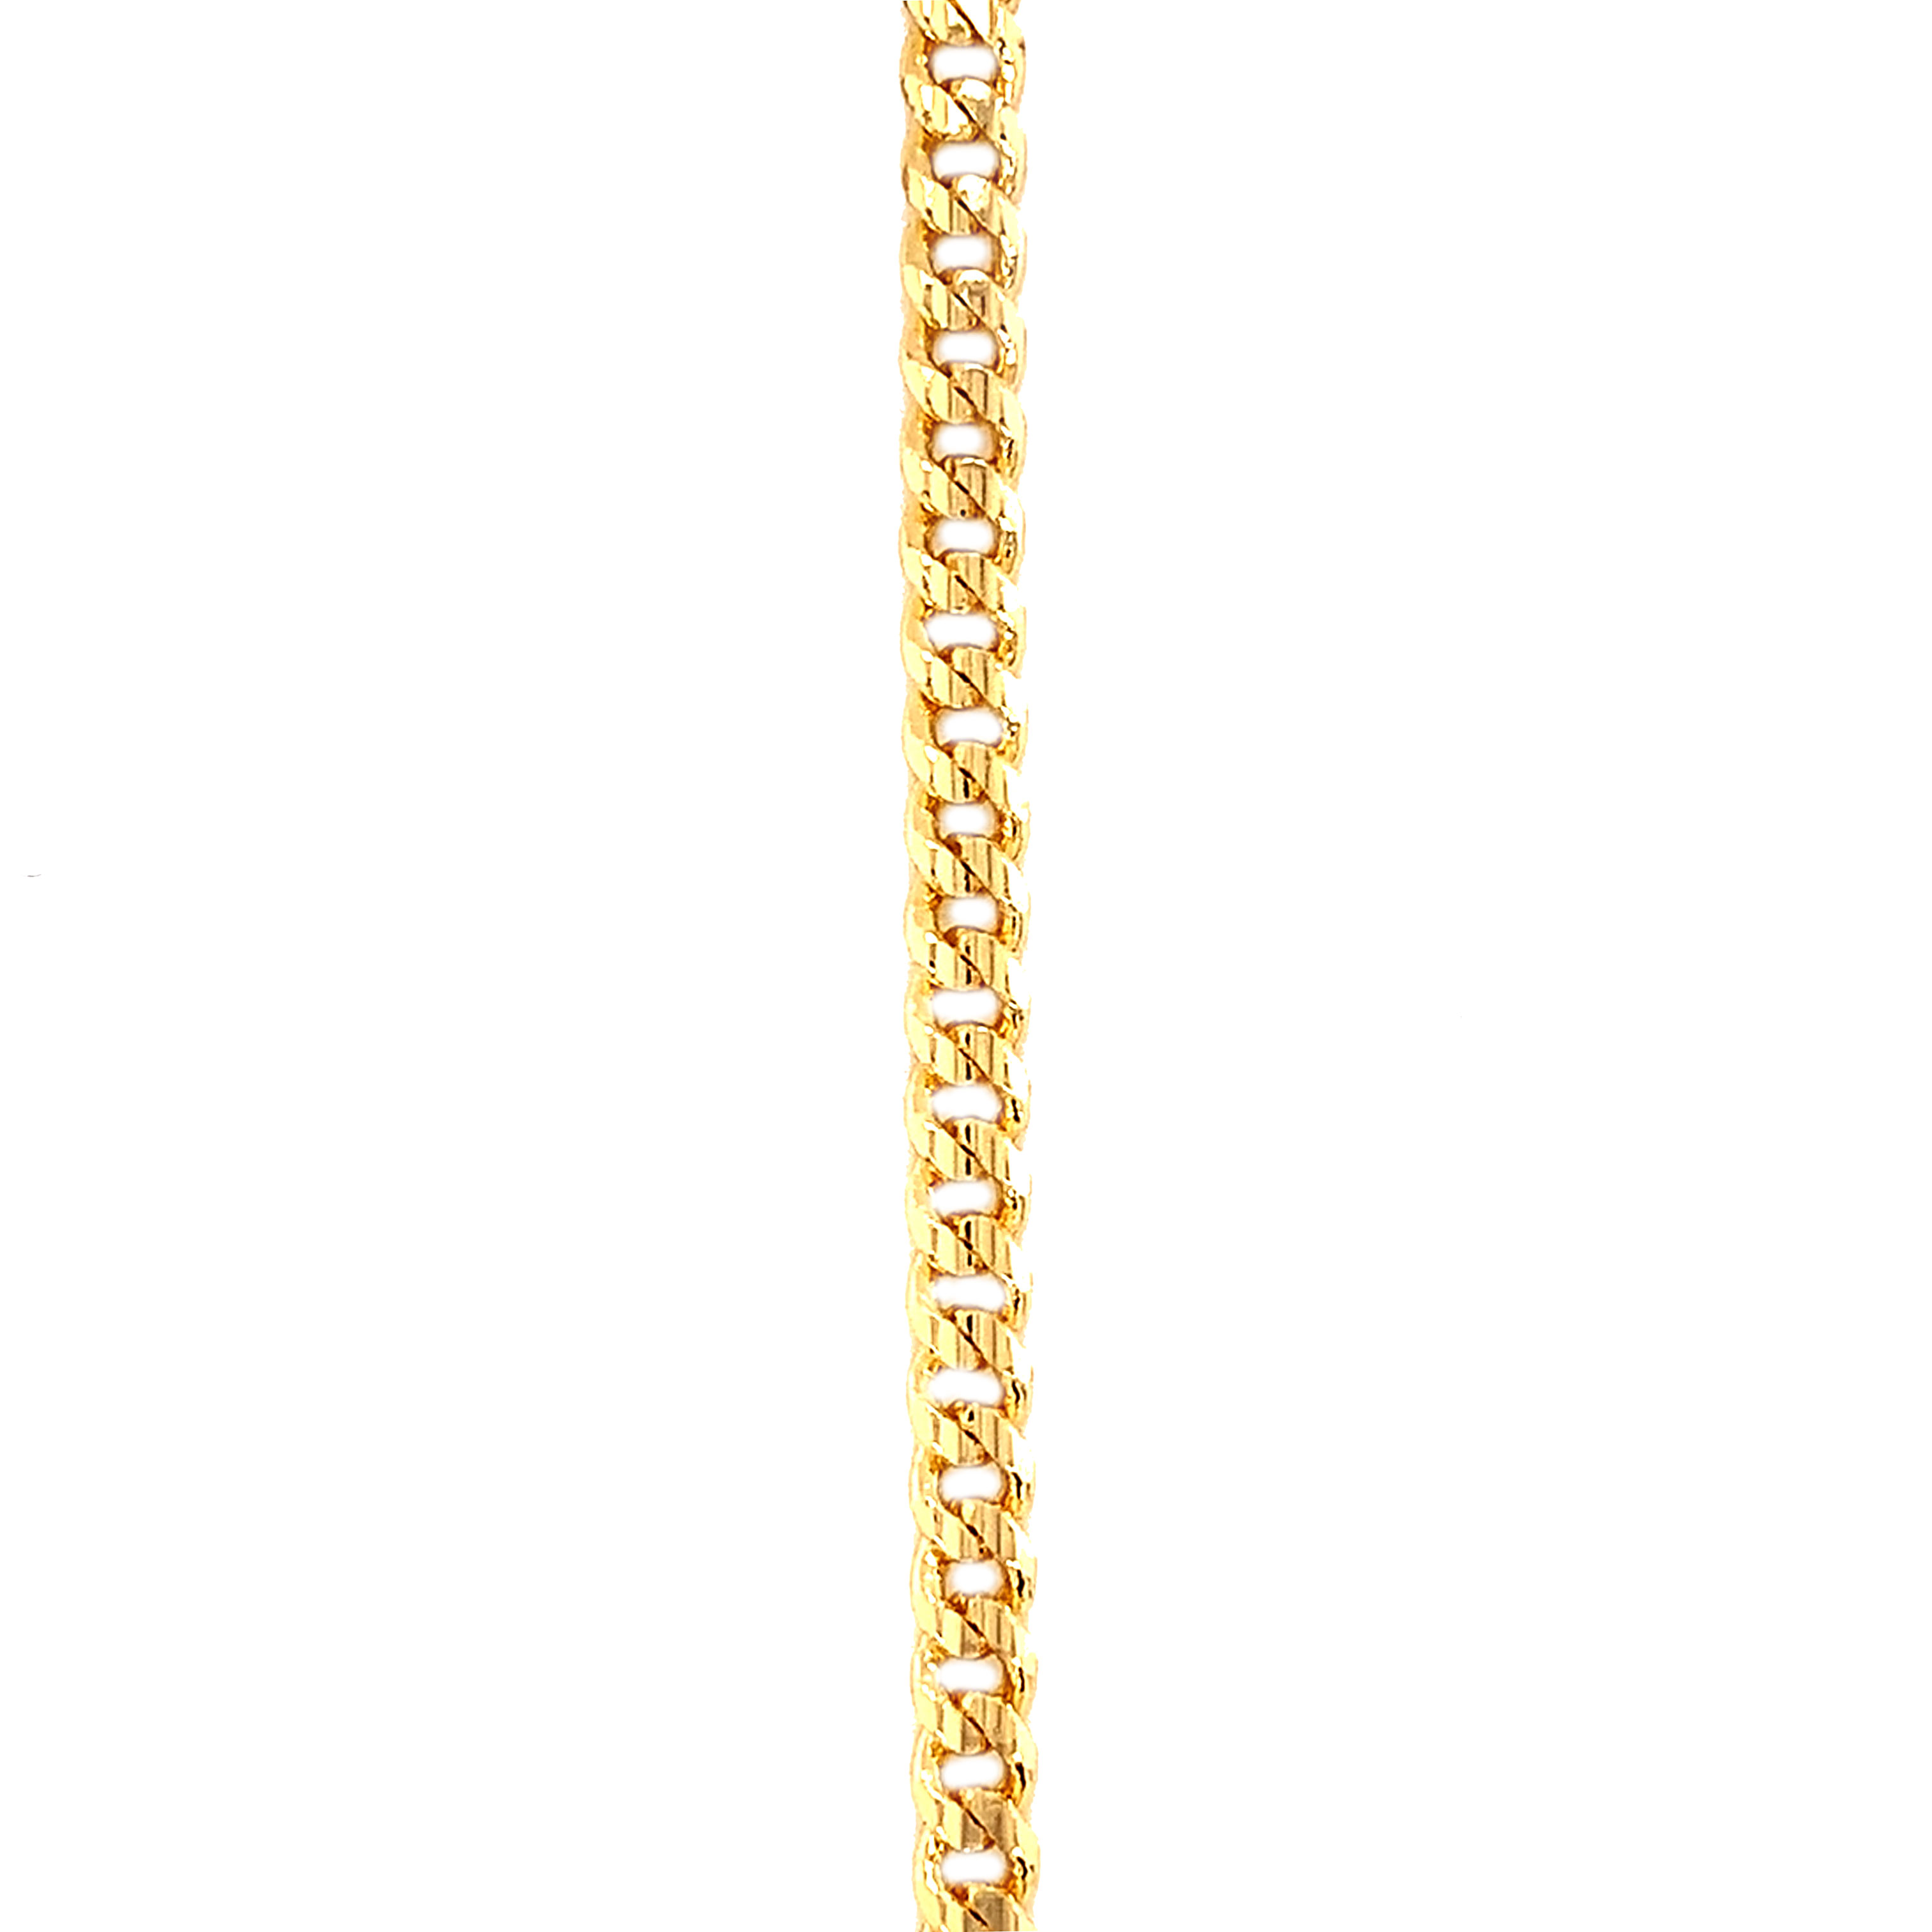 4mm Curb Chain - Gold Plated - Price per foot